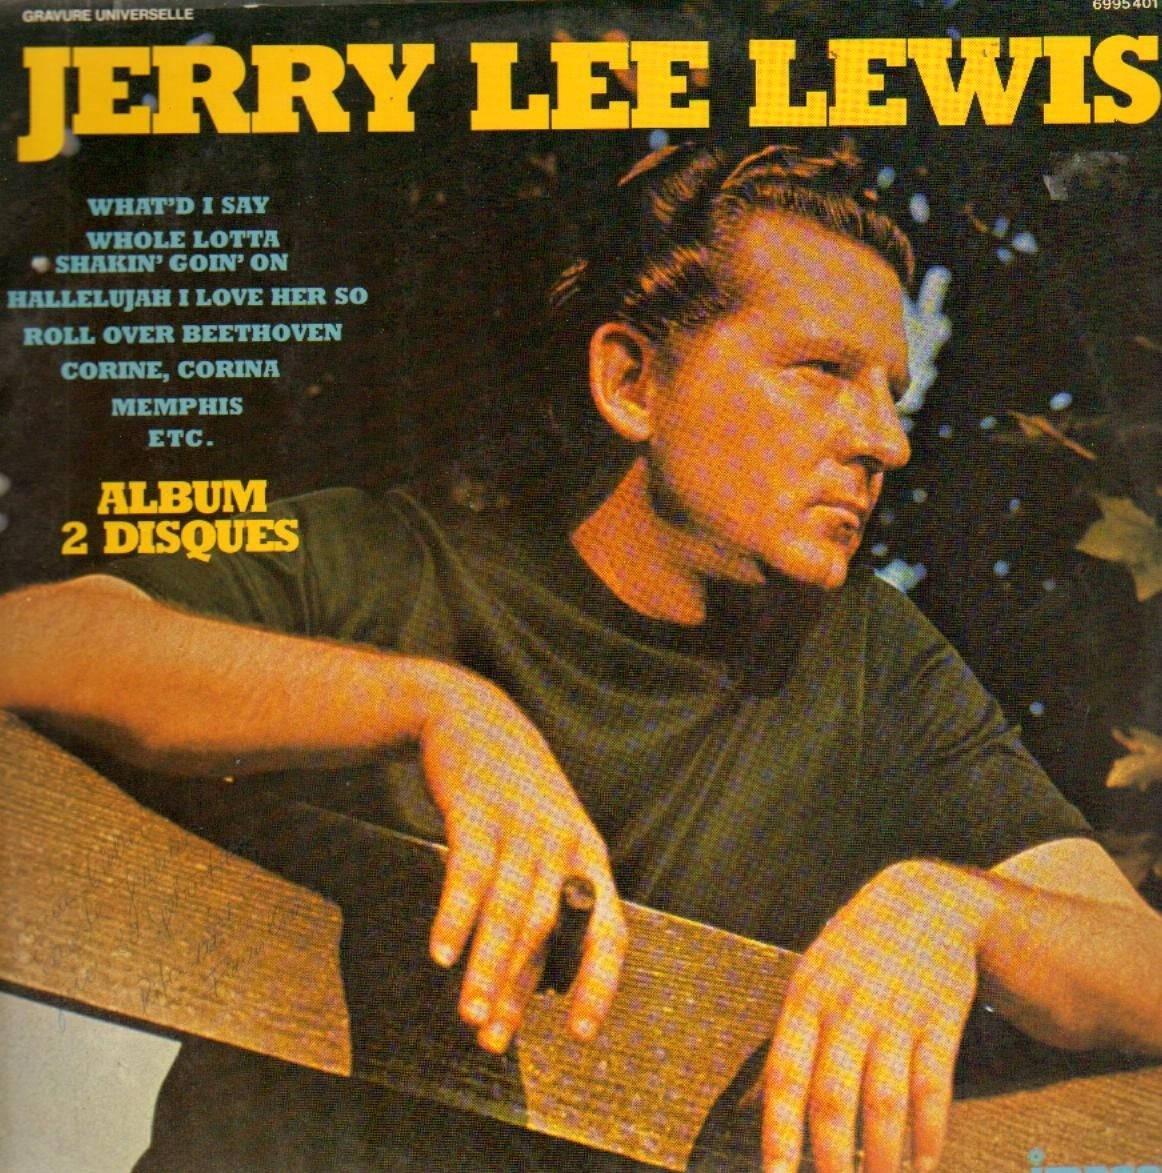 Jerry Lee Lewis Cover With Cigar Wallpaper